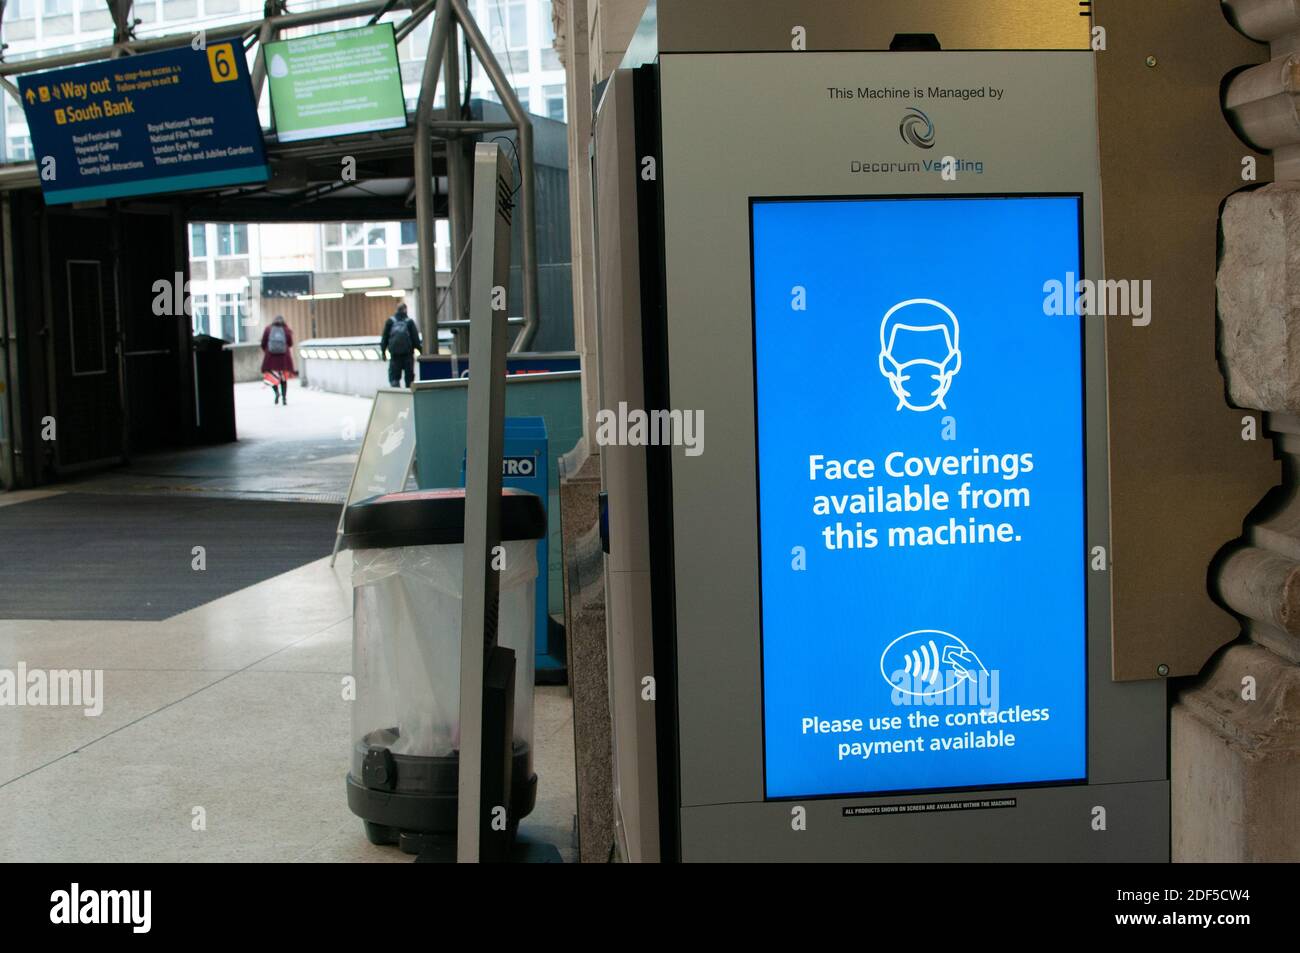 face coverings machine Waterloo station Stock Photo